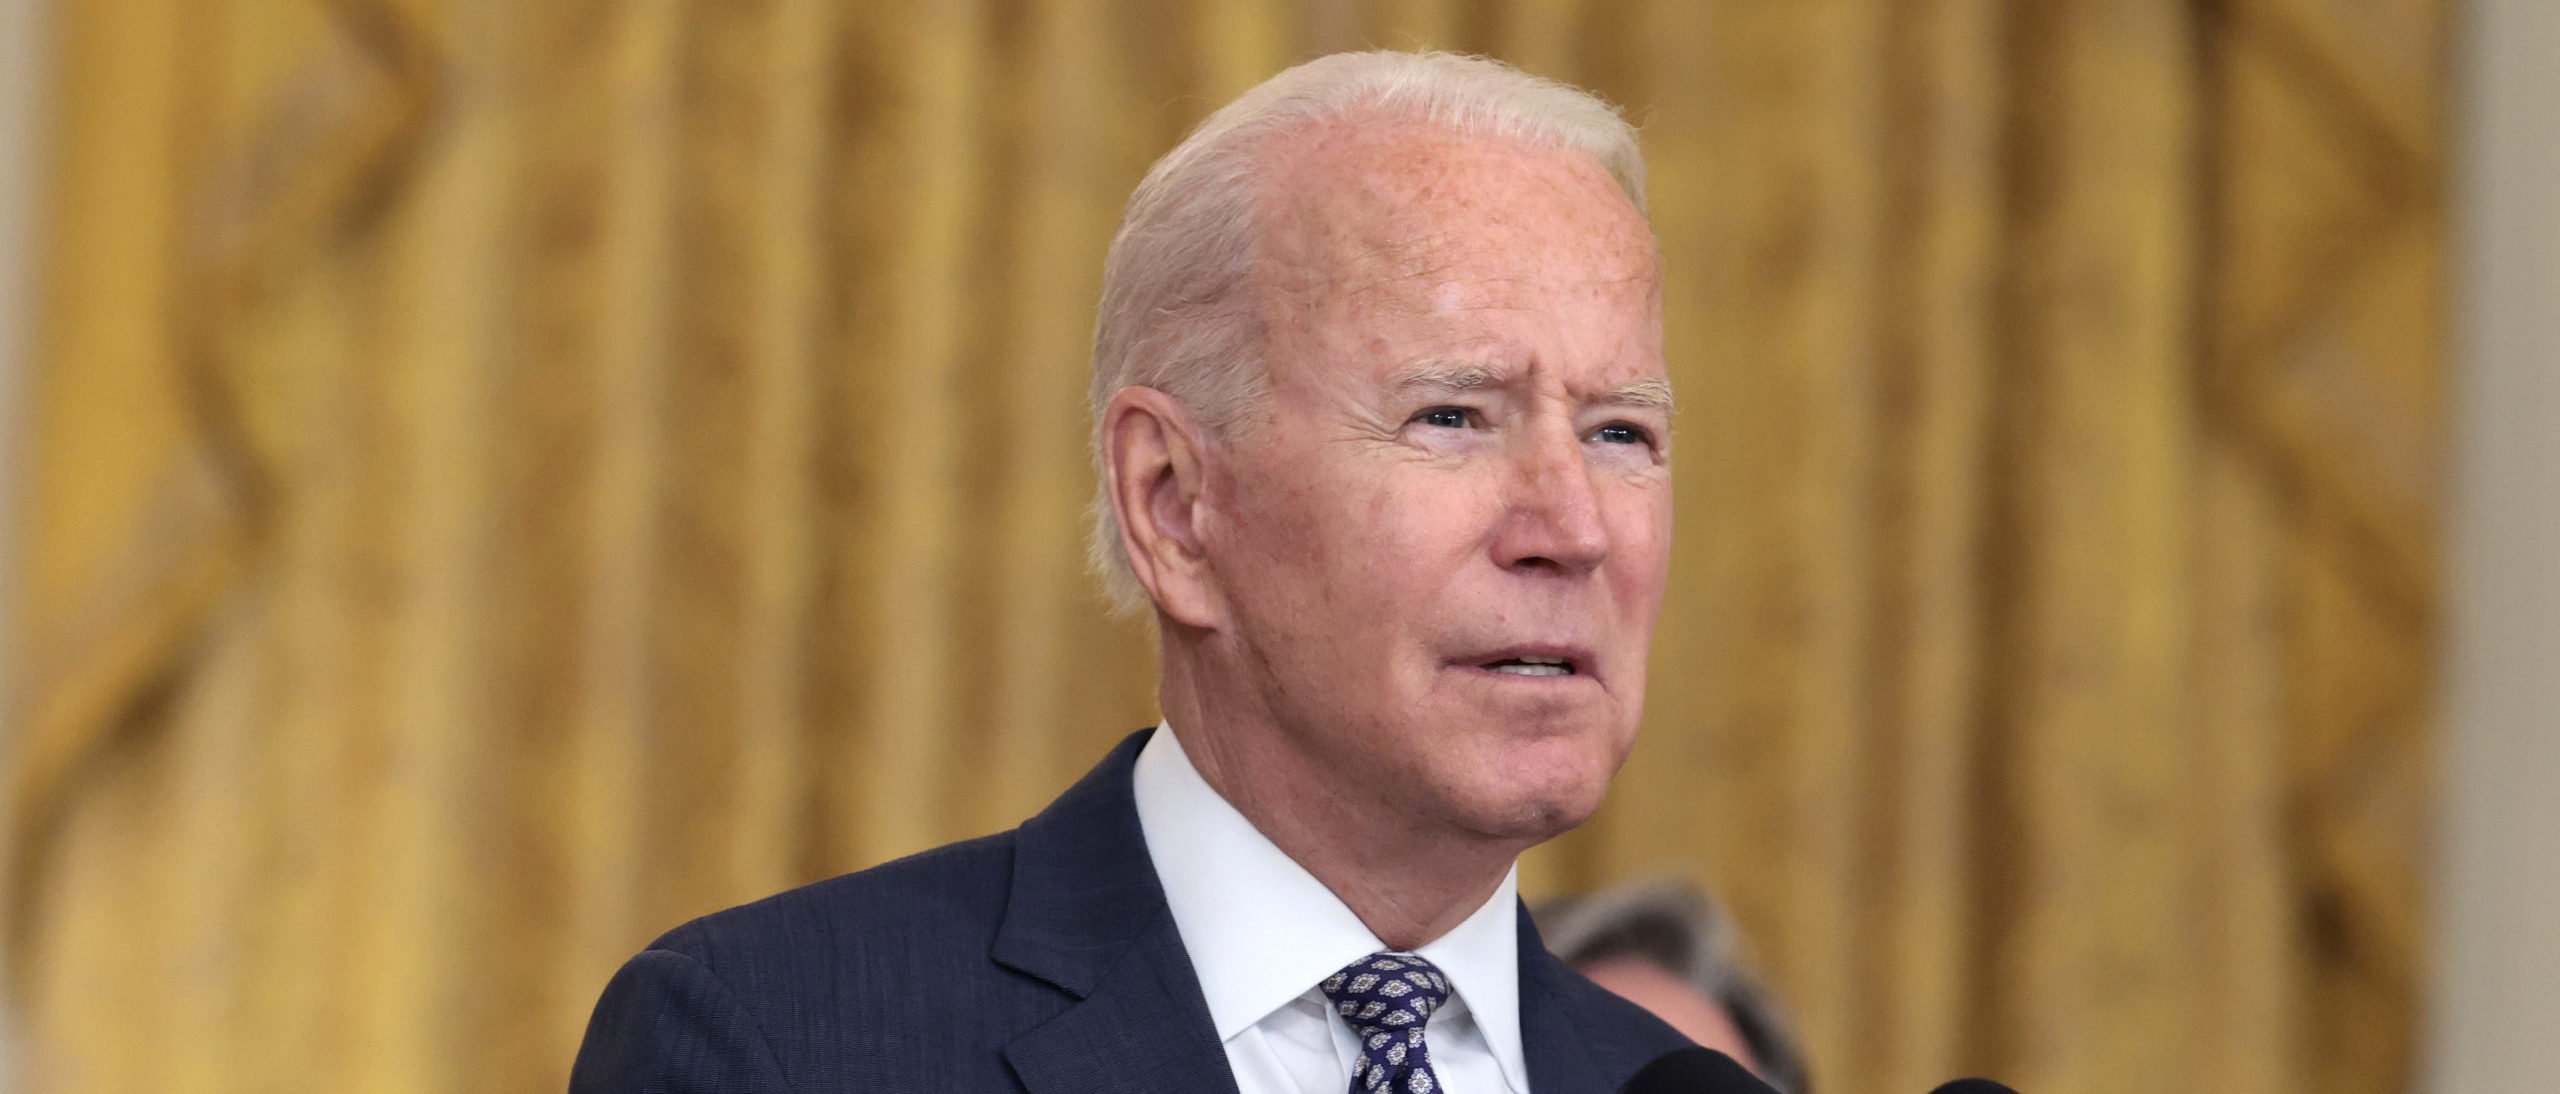 EXCLUSIVE: ‘This Is A Massive F*** Up’: Team Organizing Private Flights Out Of Afghanistan Says The Biden Administration Has Been An ‘Impediment’ To Their Evacuations